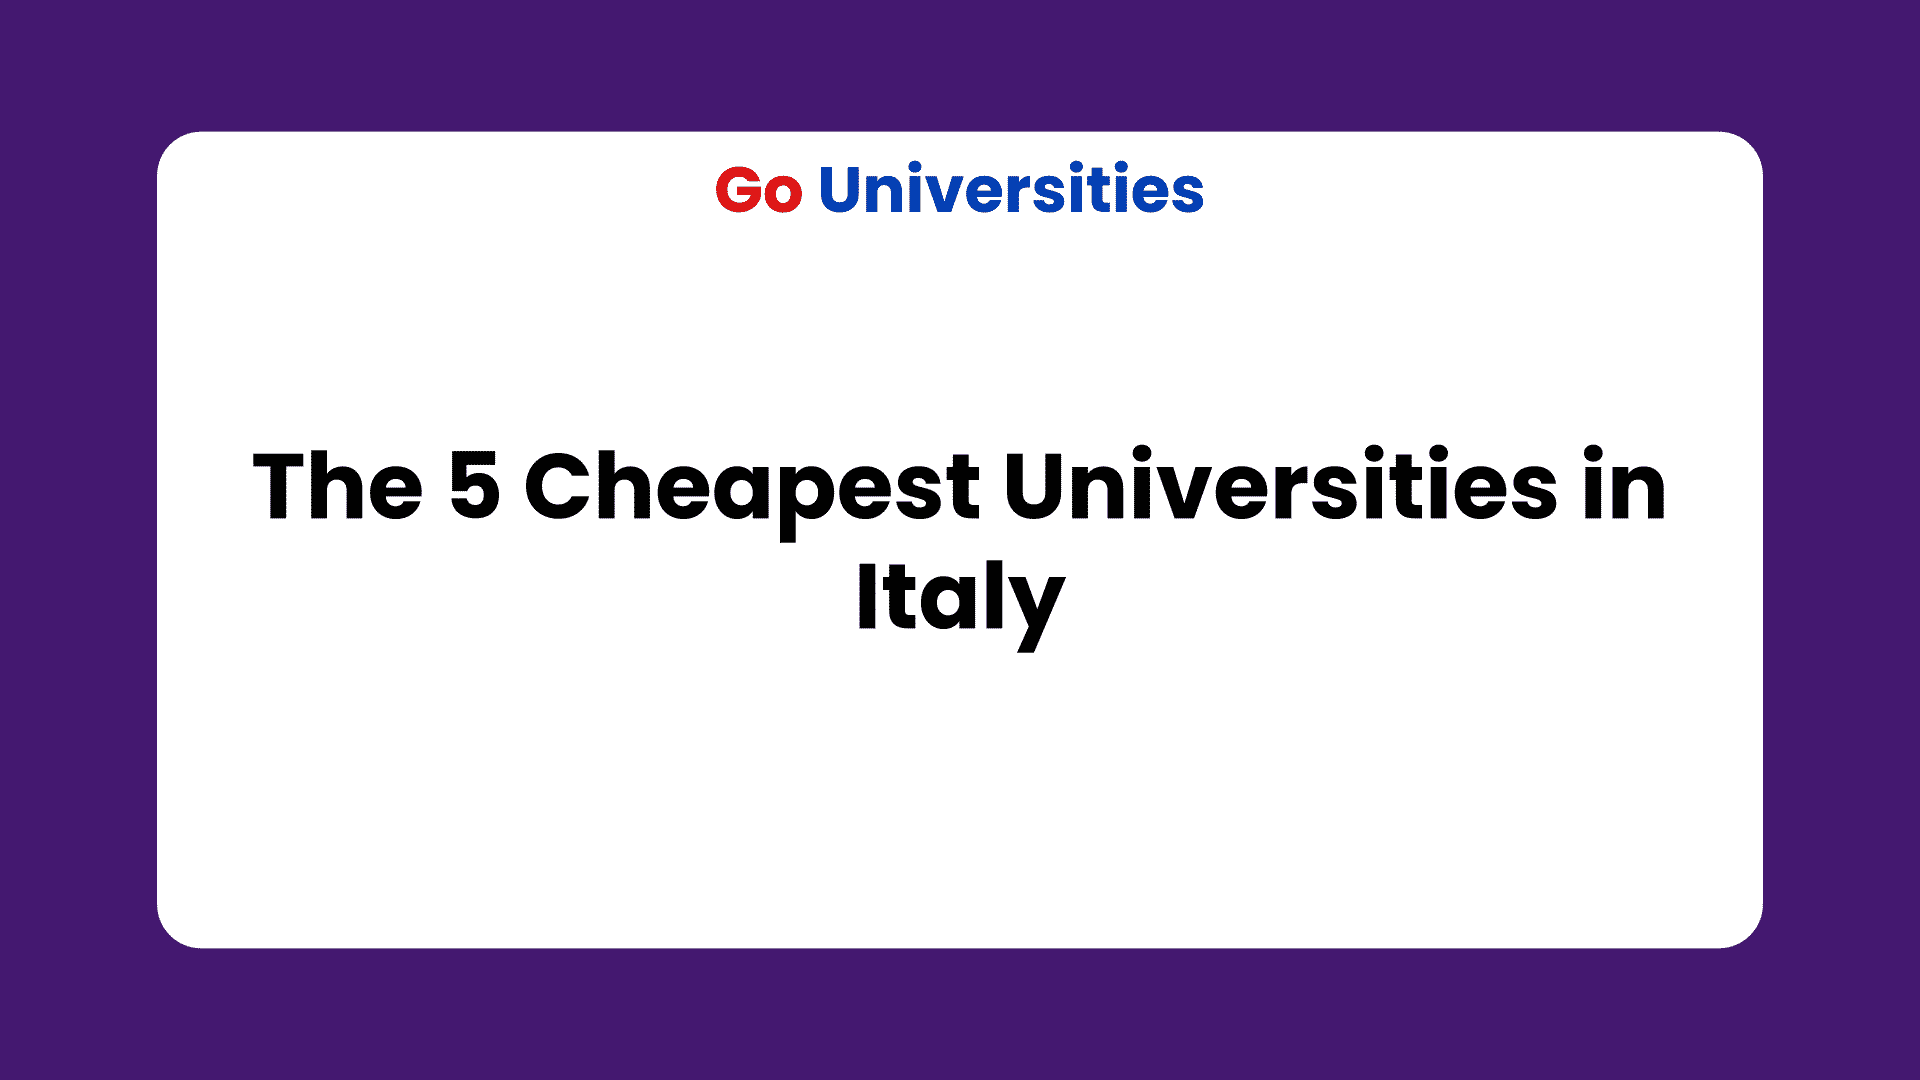 The 5 Cheapest Universities in Italy for international students